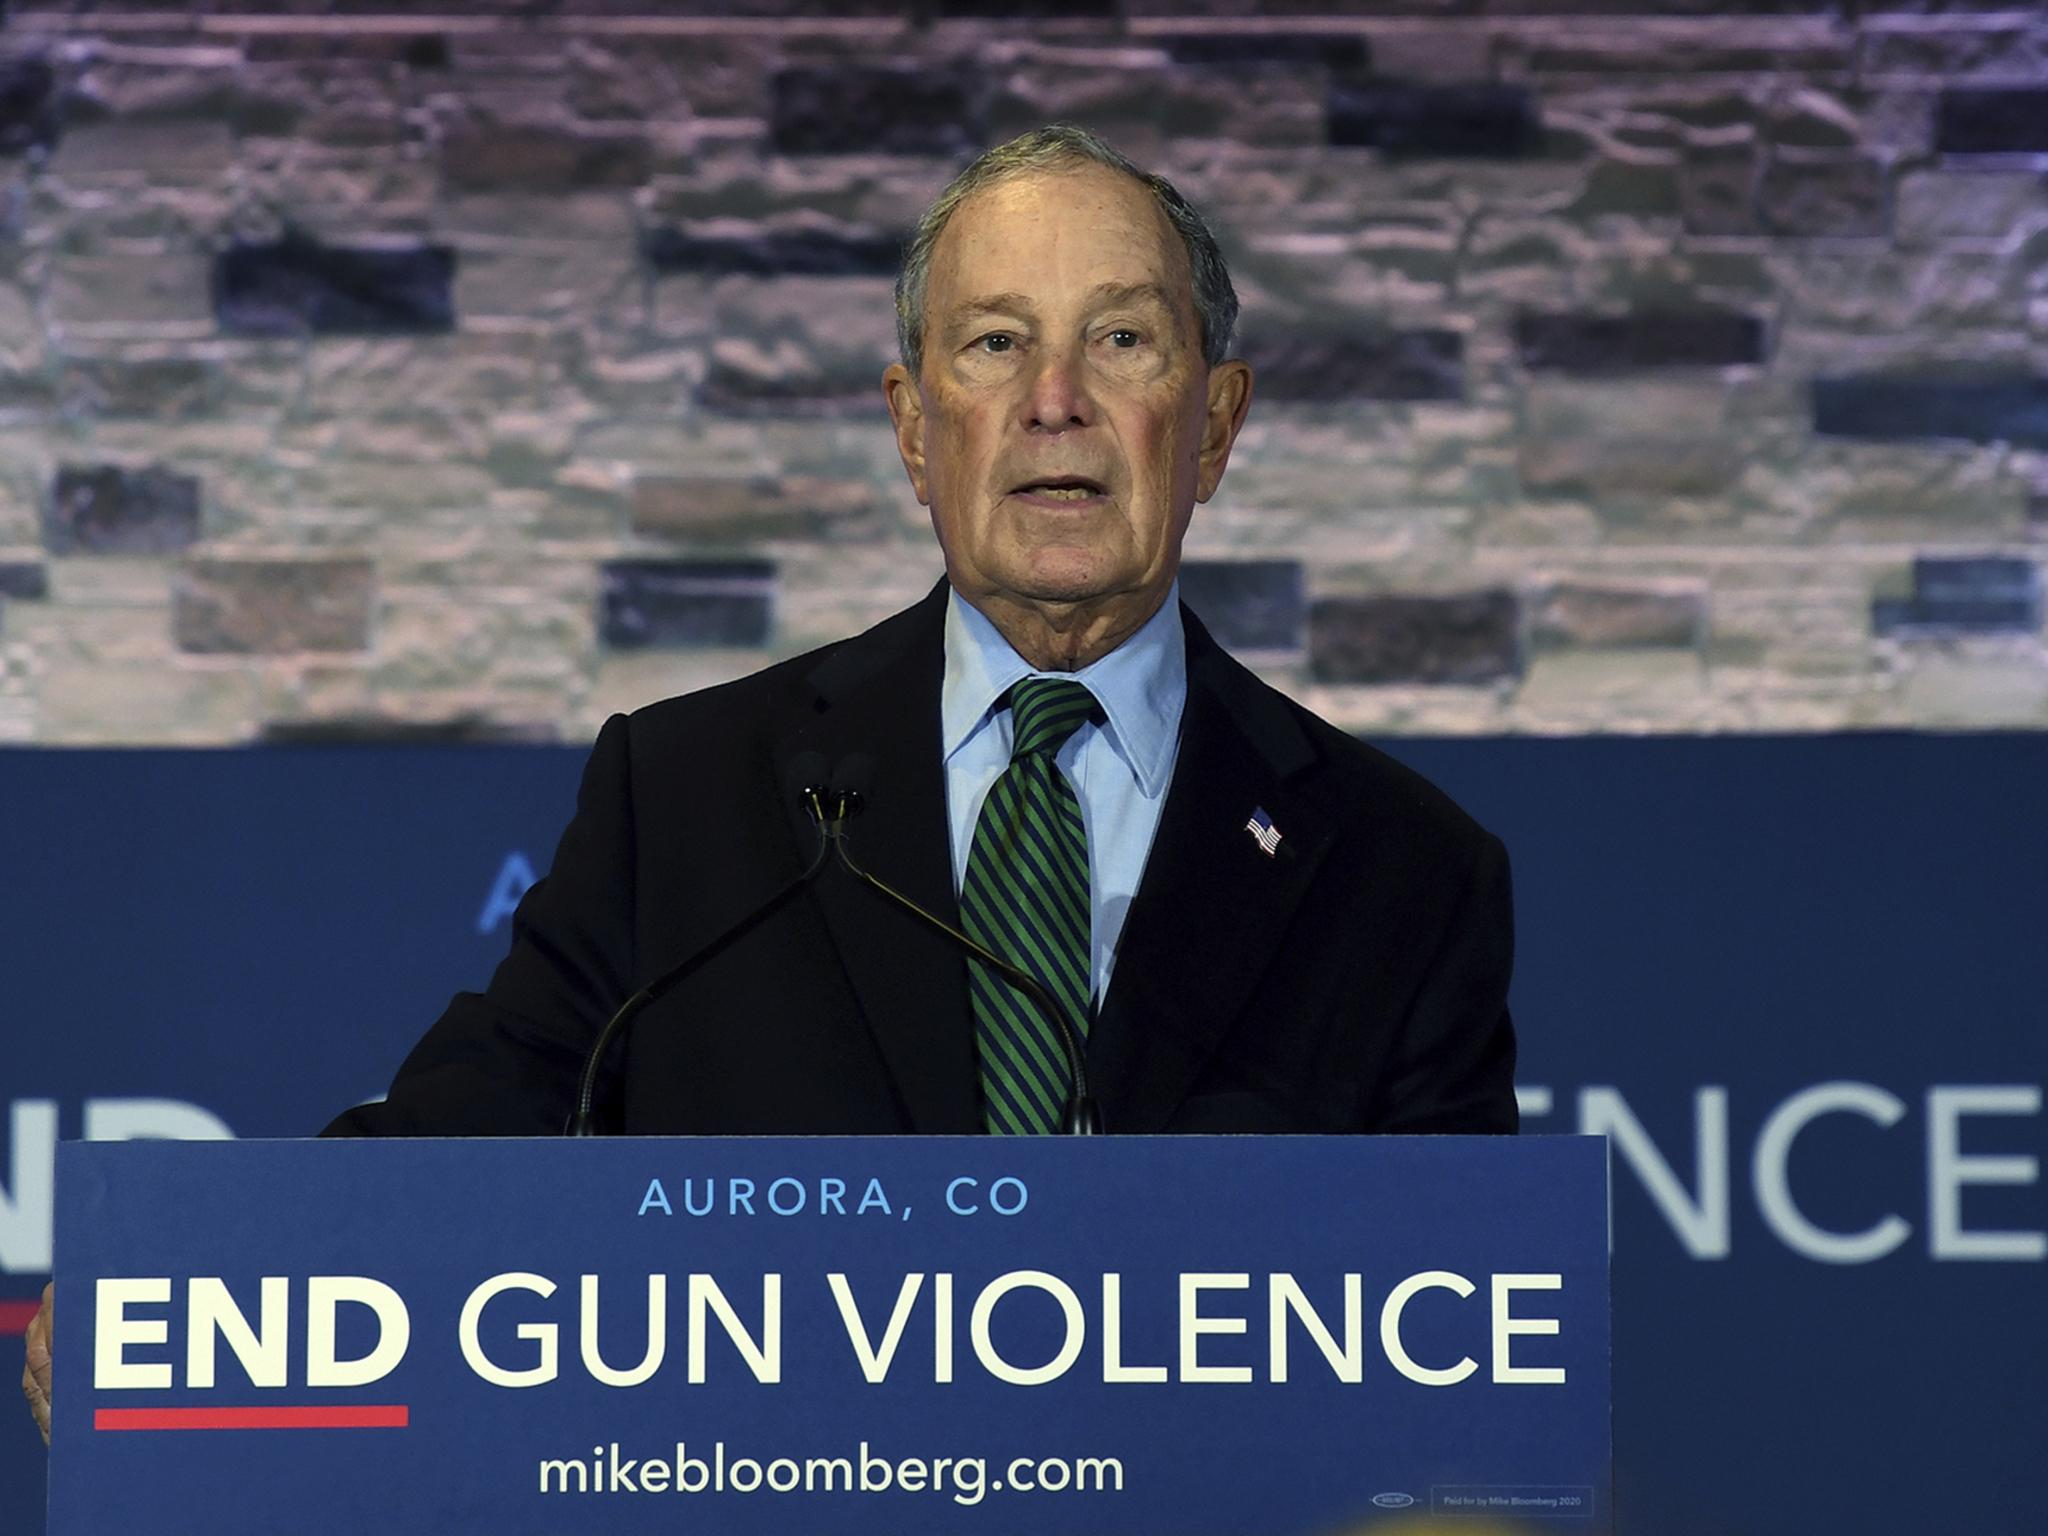 Bloomberg was speaking at a campaign event in Aurora, Colorado